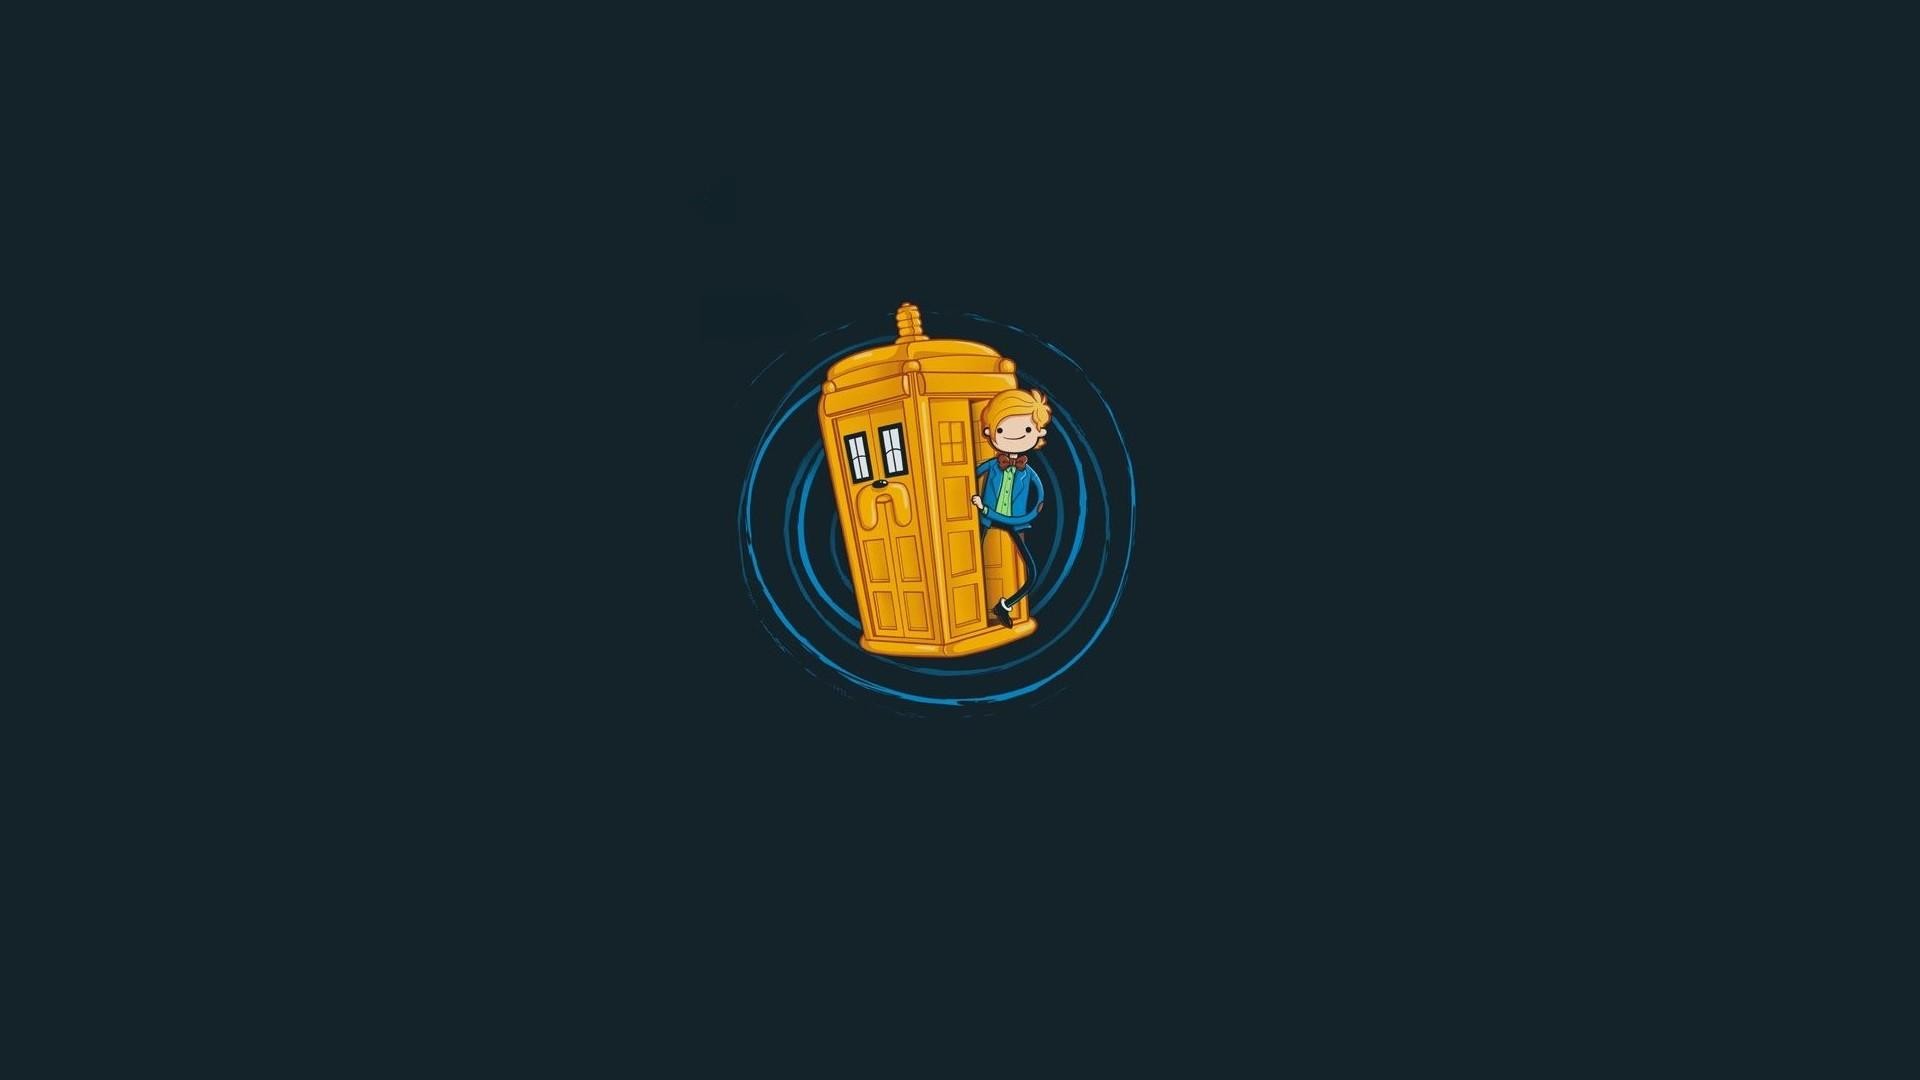 Doctor who wallpaper iphone